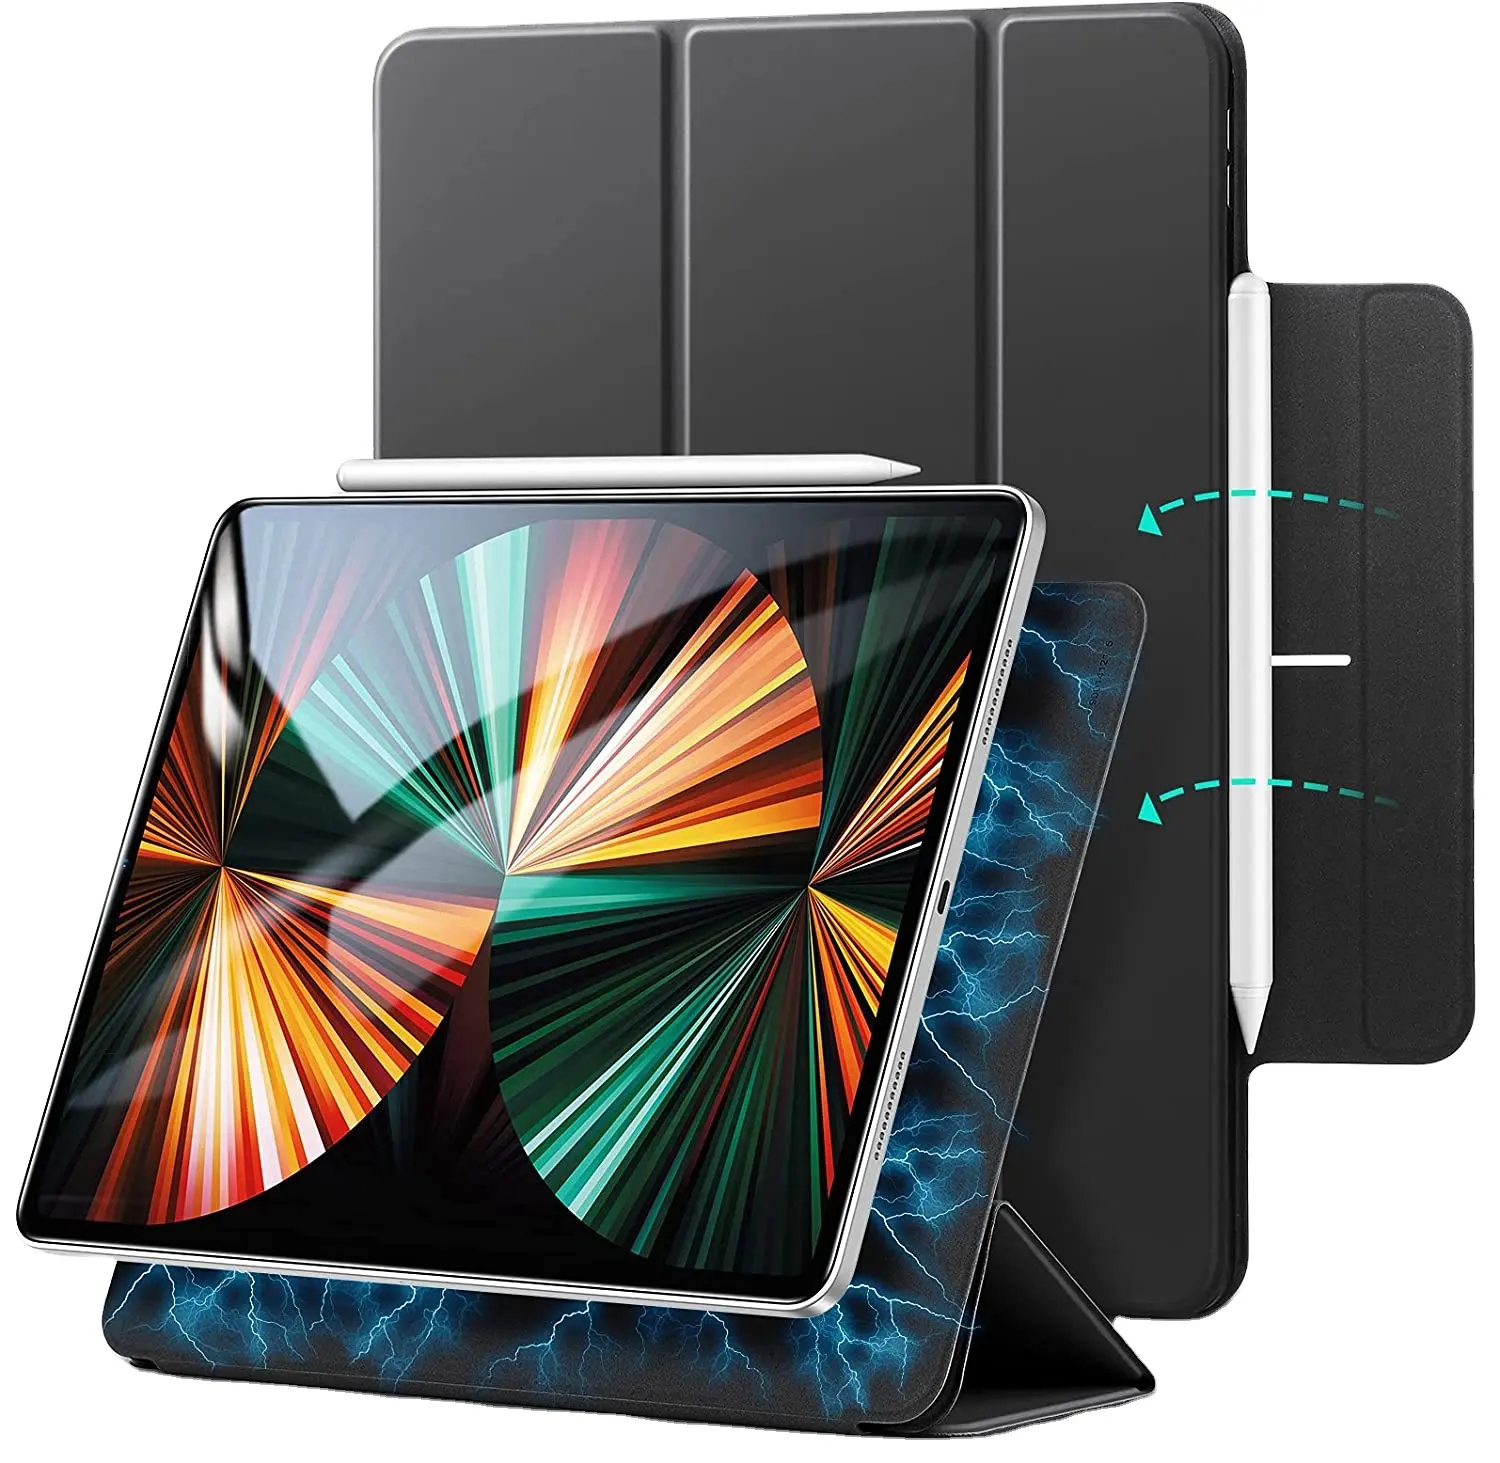 New Magic Magnetic Case for ipad Trifold Stand Smart Cover for iPad 9th/10th / iPad Air 4/Air 5/iPad Pro 11/12.9 inch 2018-2022